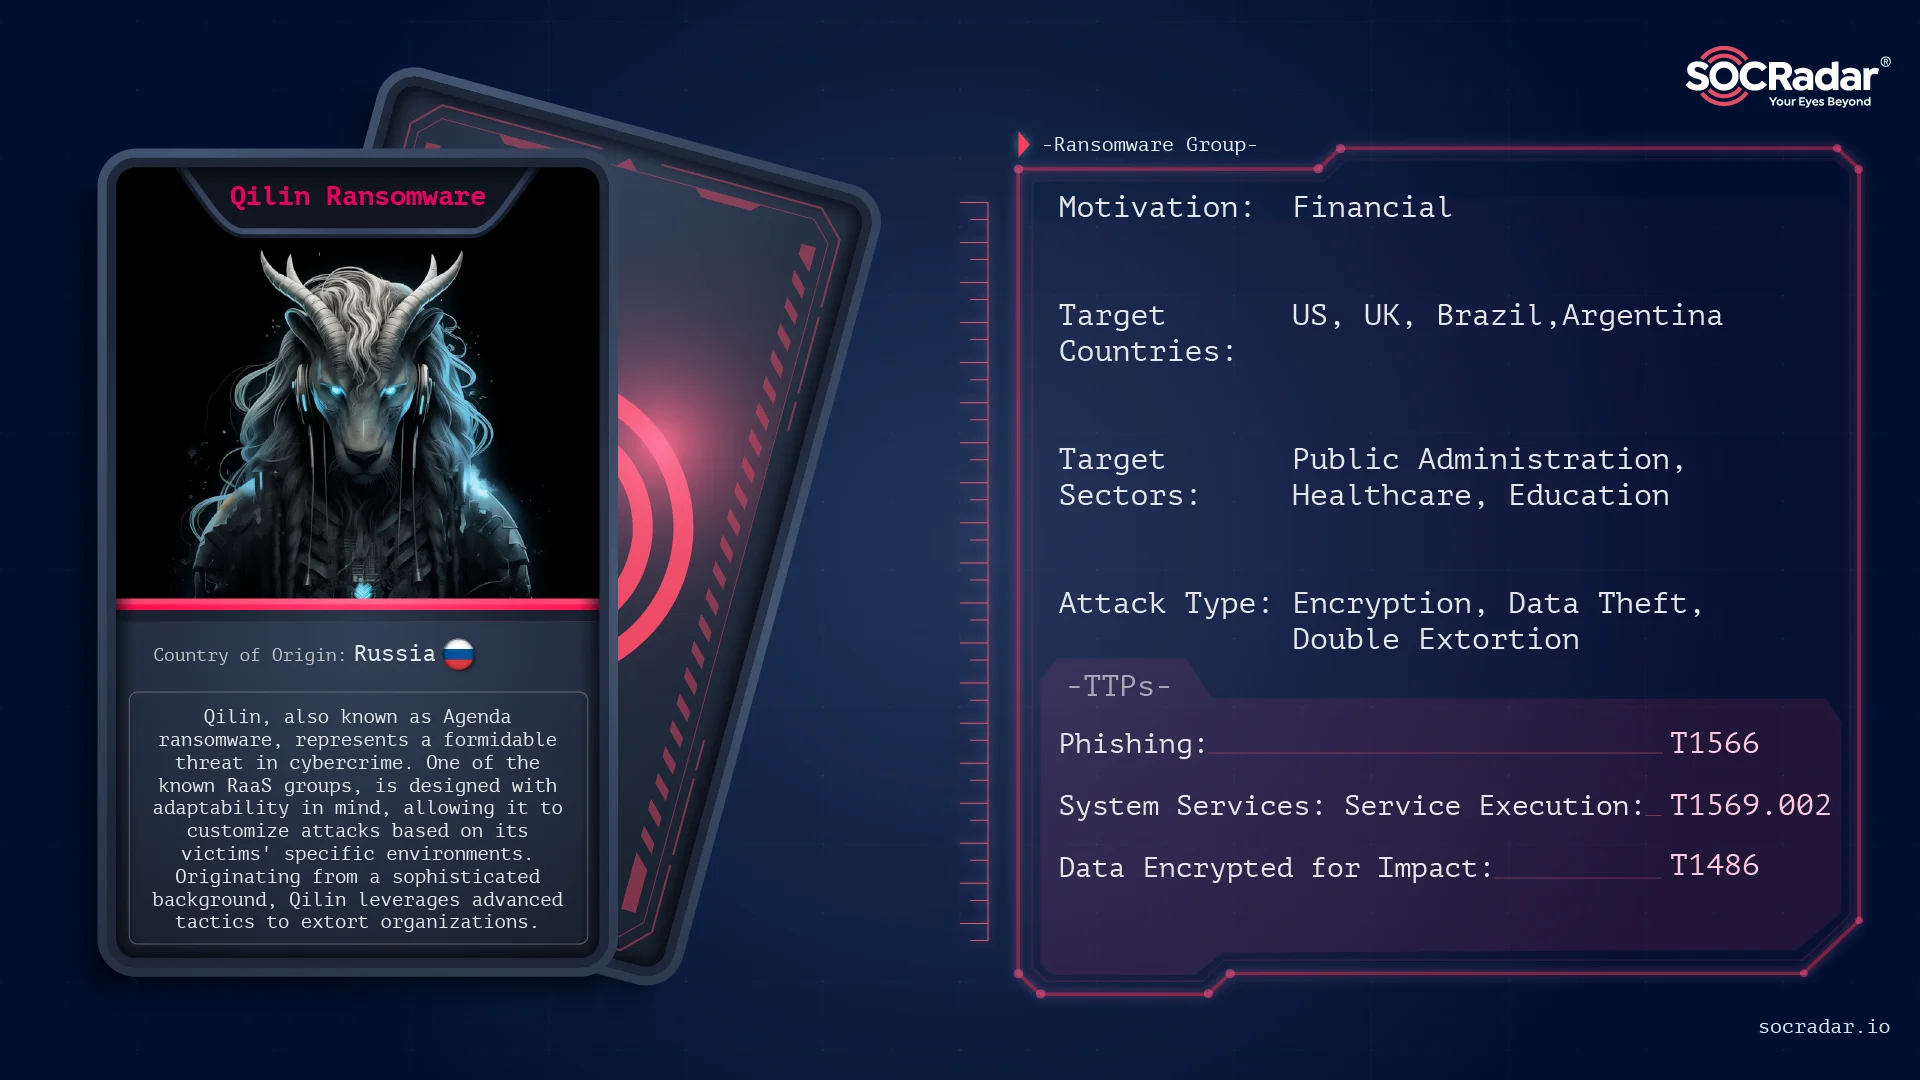 Threat Actor Card for Qilin Ransomware